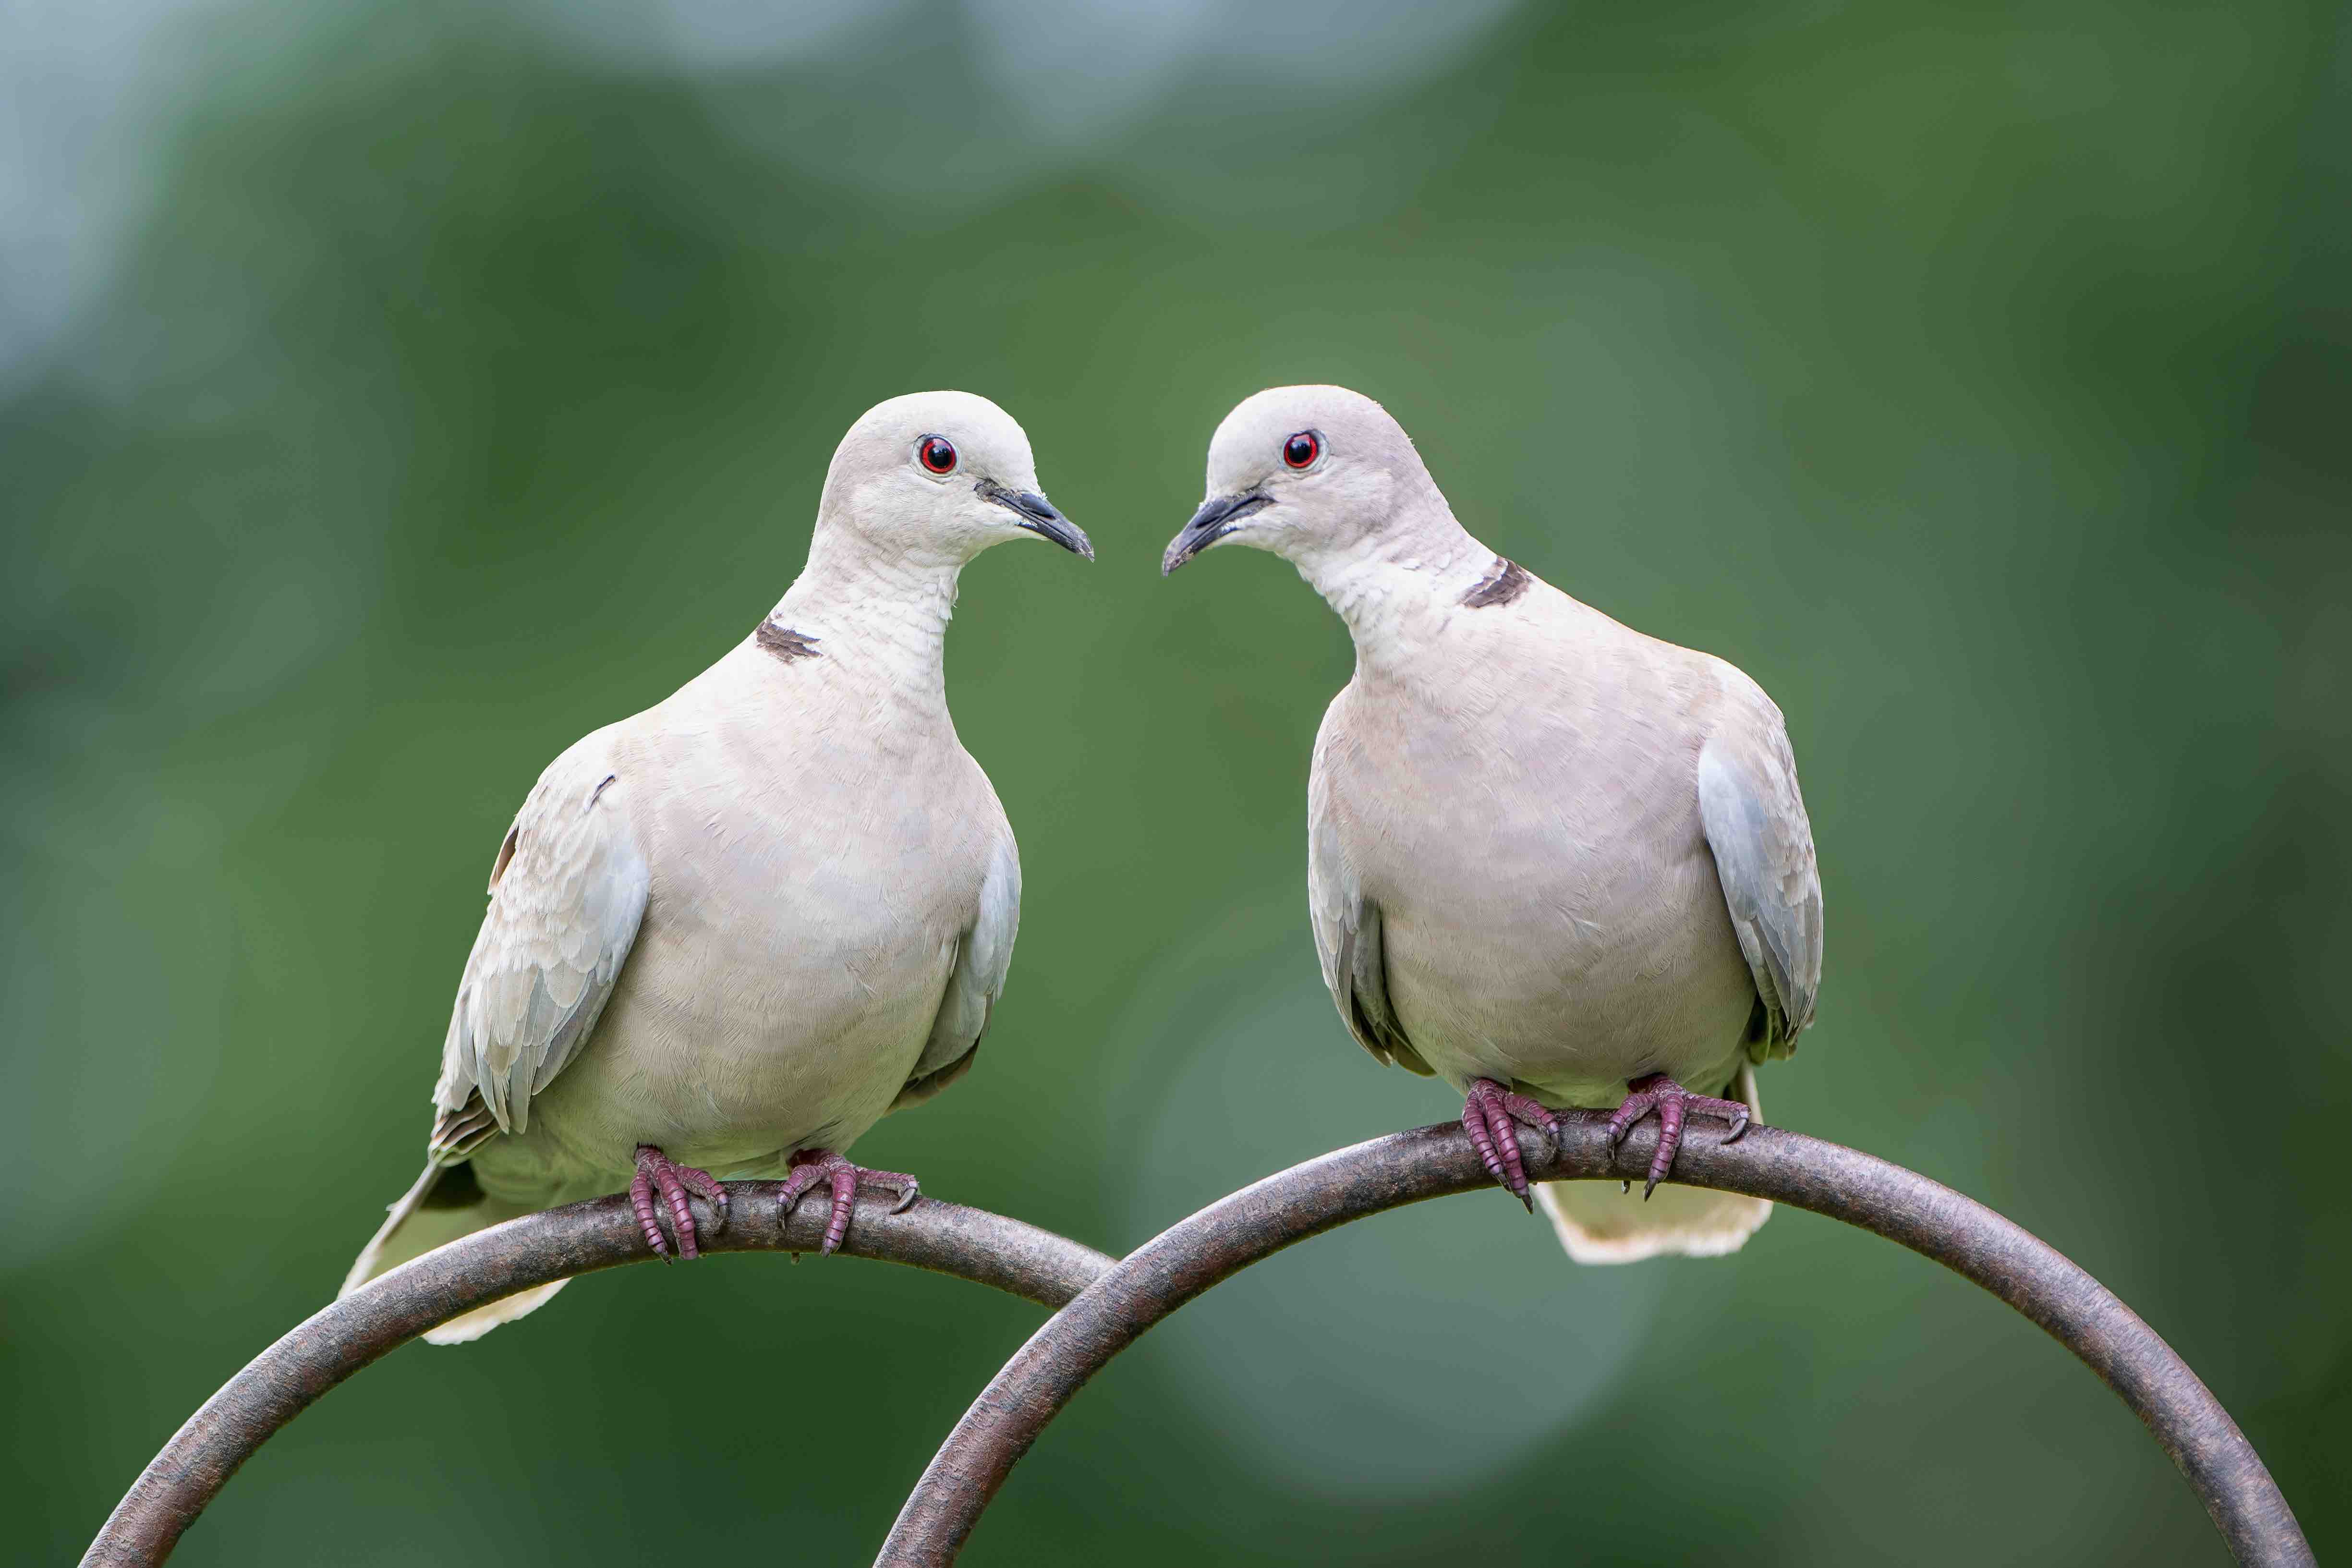 10 Facts About Doves The Most Symbolic Birds - Facts.net